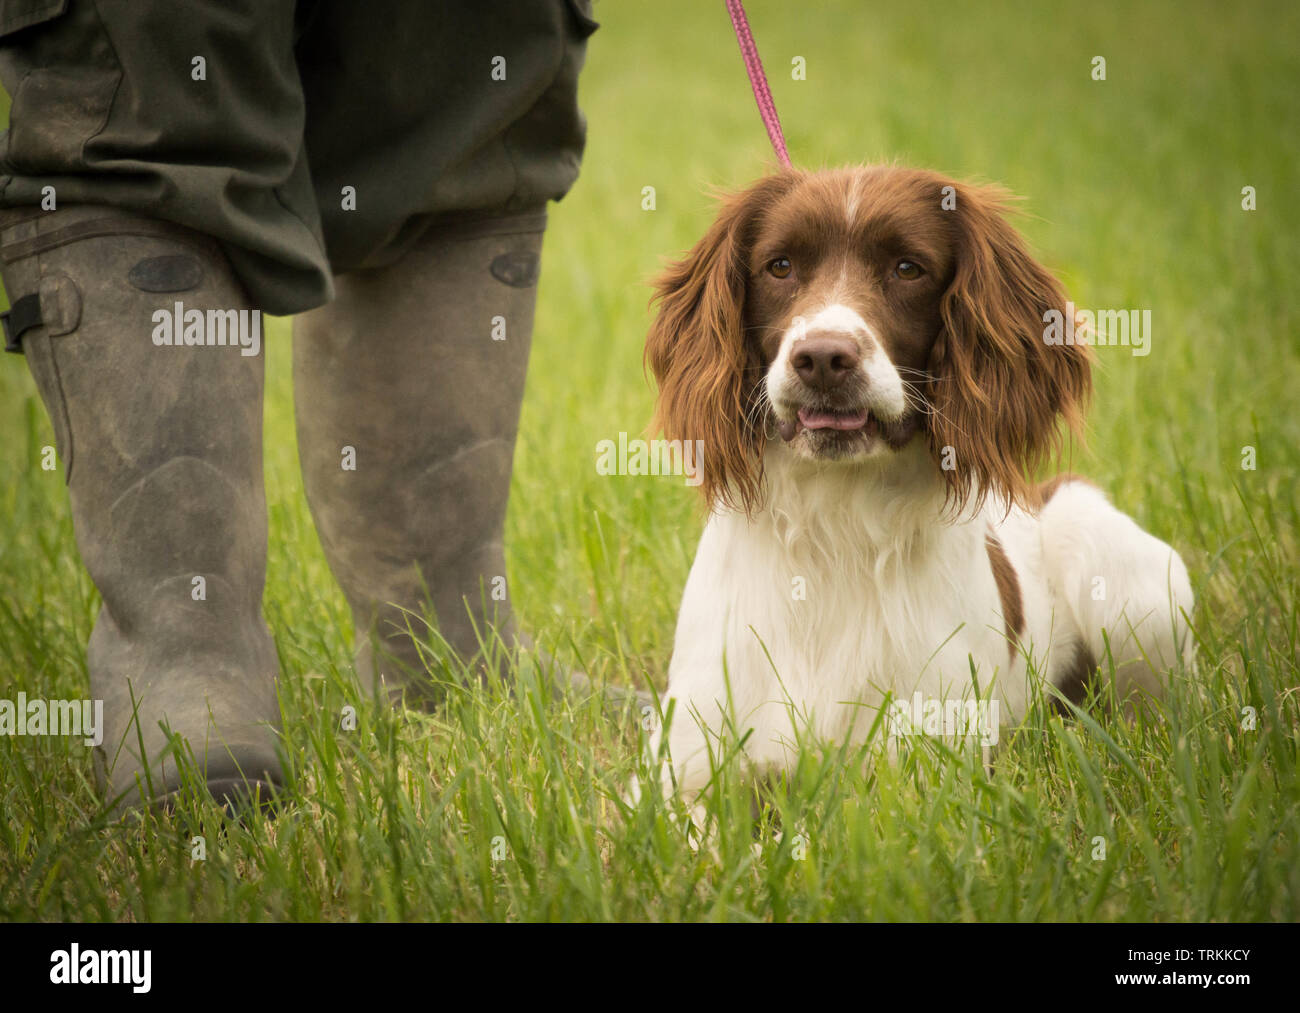 English Springer Spaniel dog lying down in a field by its owners wellington boots Stock Photo